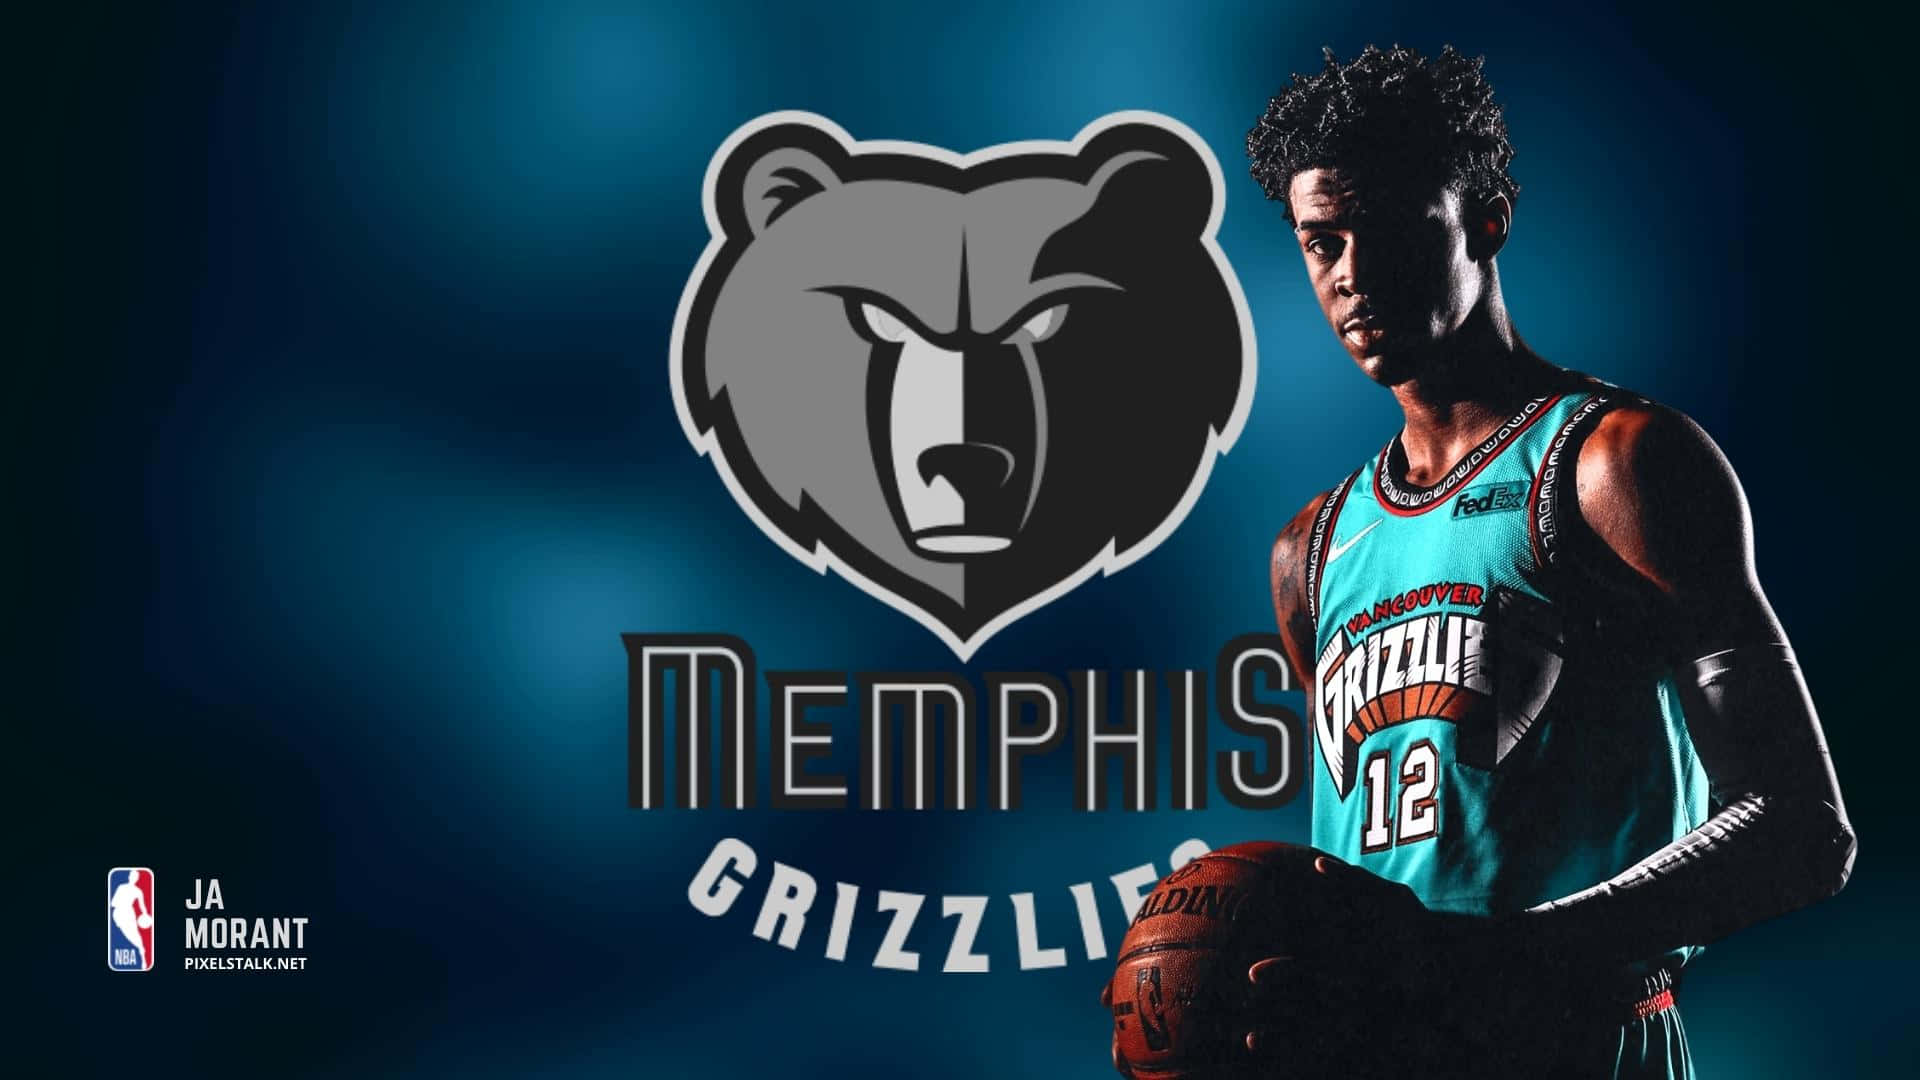 Image  Ja Morant of the Memphis Grizzlies poses during the 2019 NBA Draft